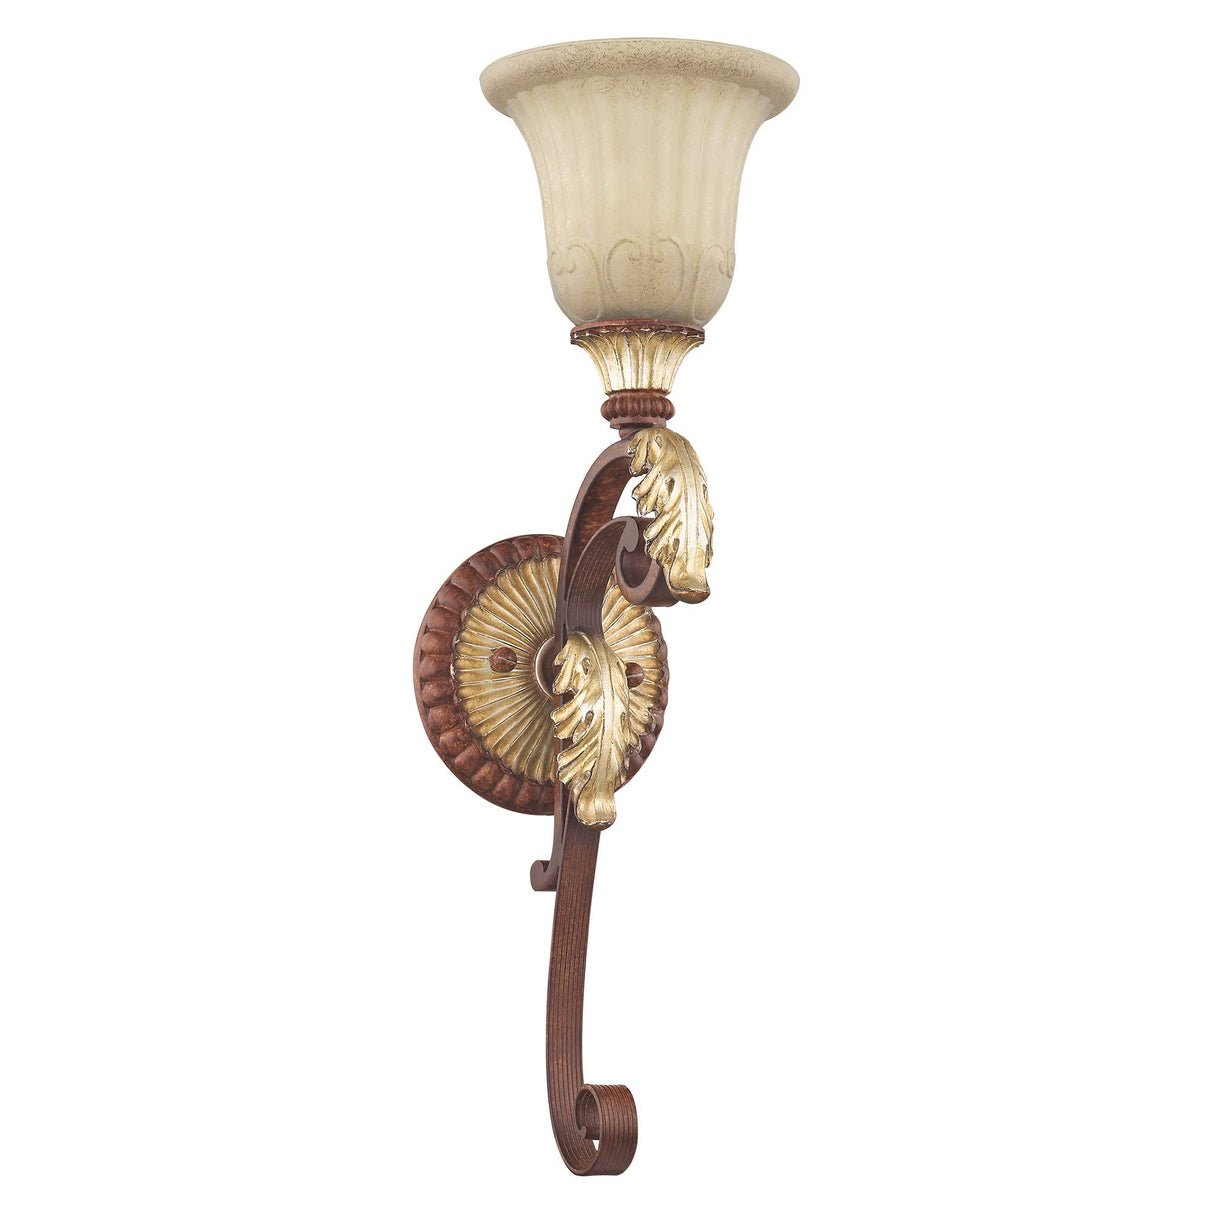 Livex Lighting 8581-63 Villa Verona 1 Light Verona Bronze Finish Wall Sconce with Aged Gold Leaf Accents and Rustic Art Glass